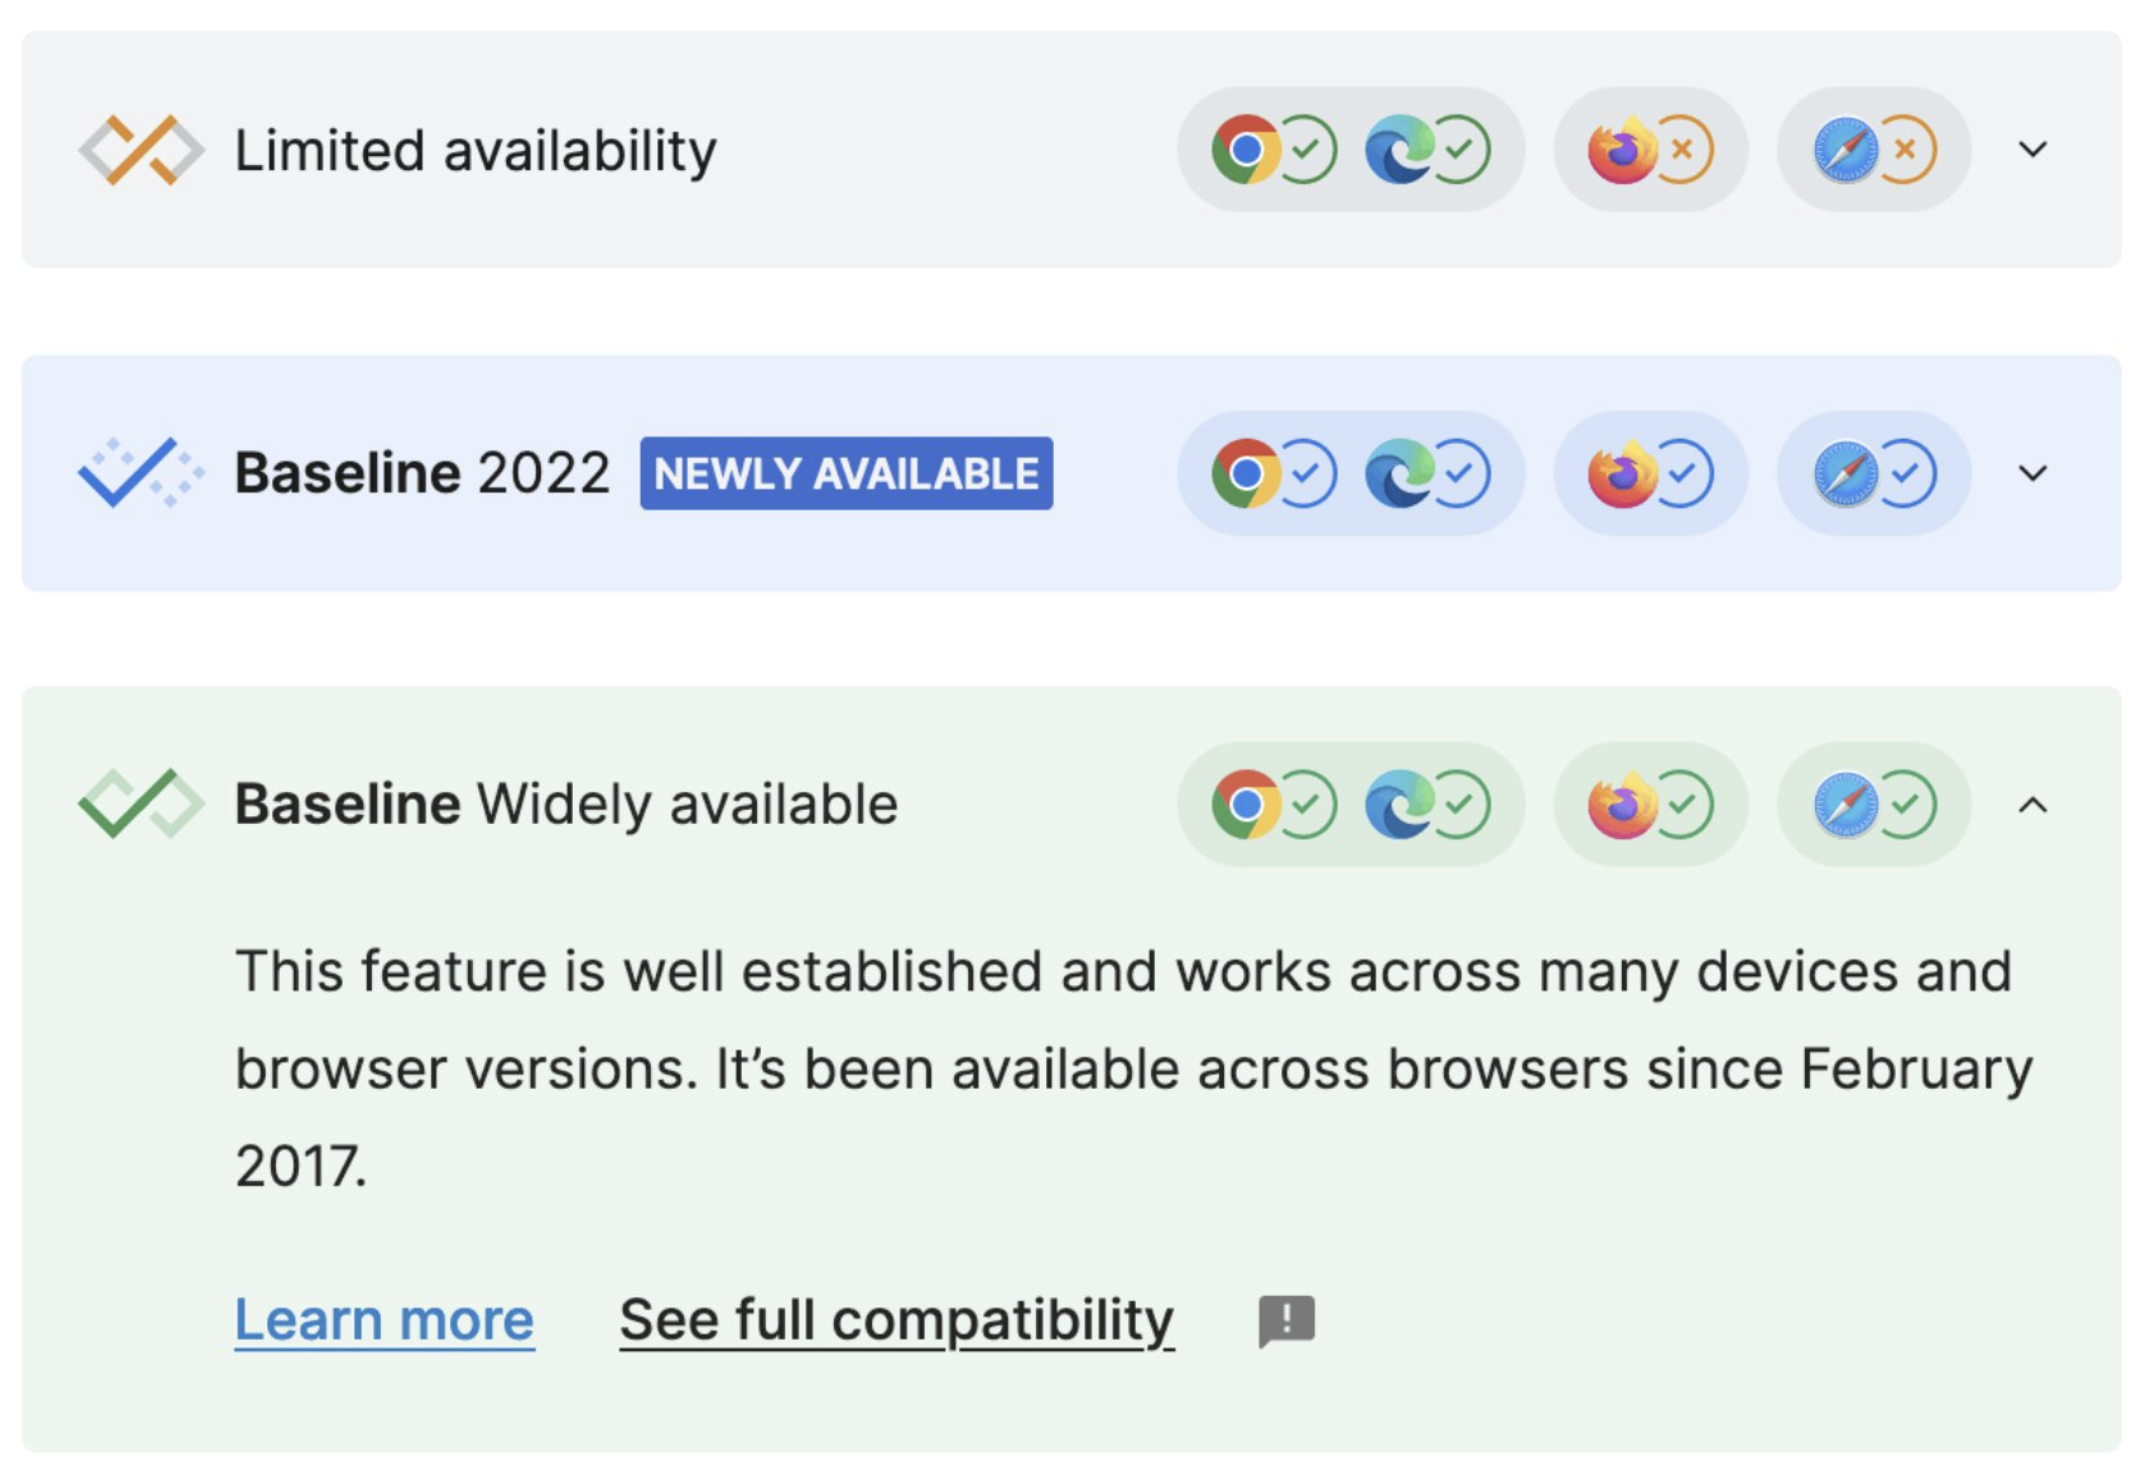 New MDN baseline widgets. It includes three types: "limited availability", "newly available" and "widely available".